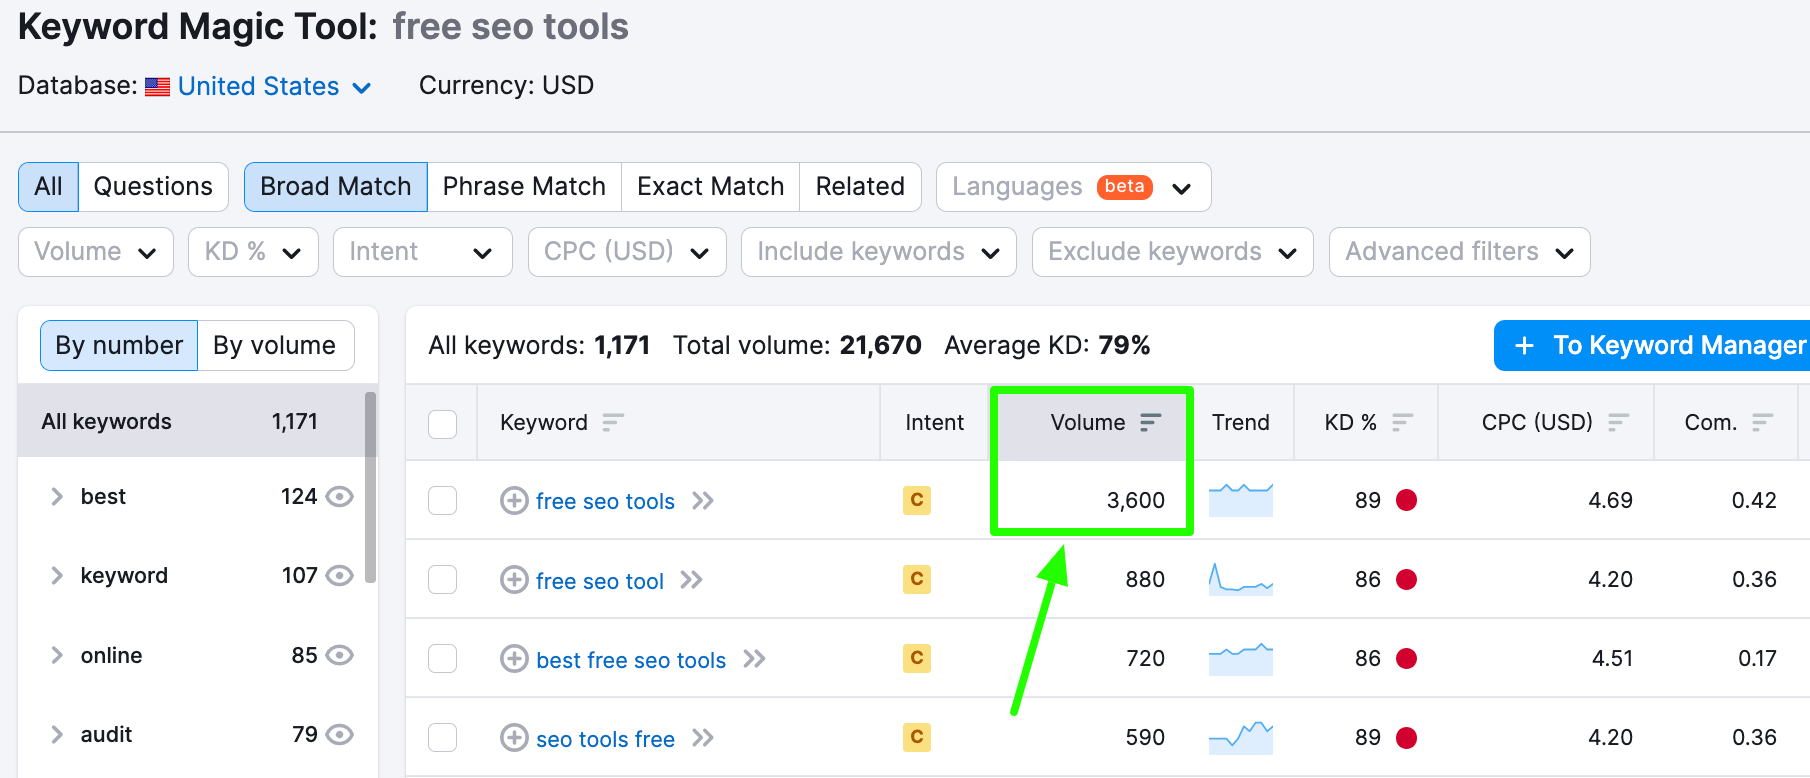 results for "free SEO tools" in Keyword Magic Tool